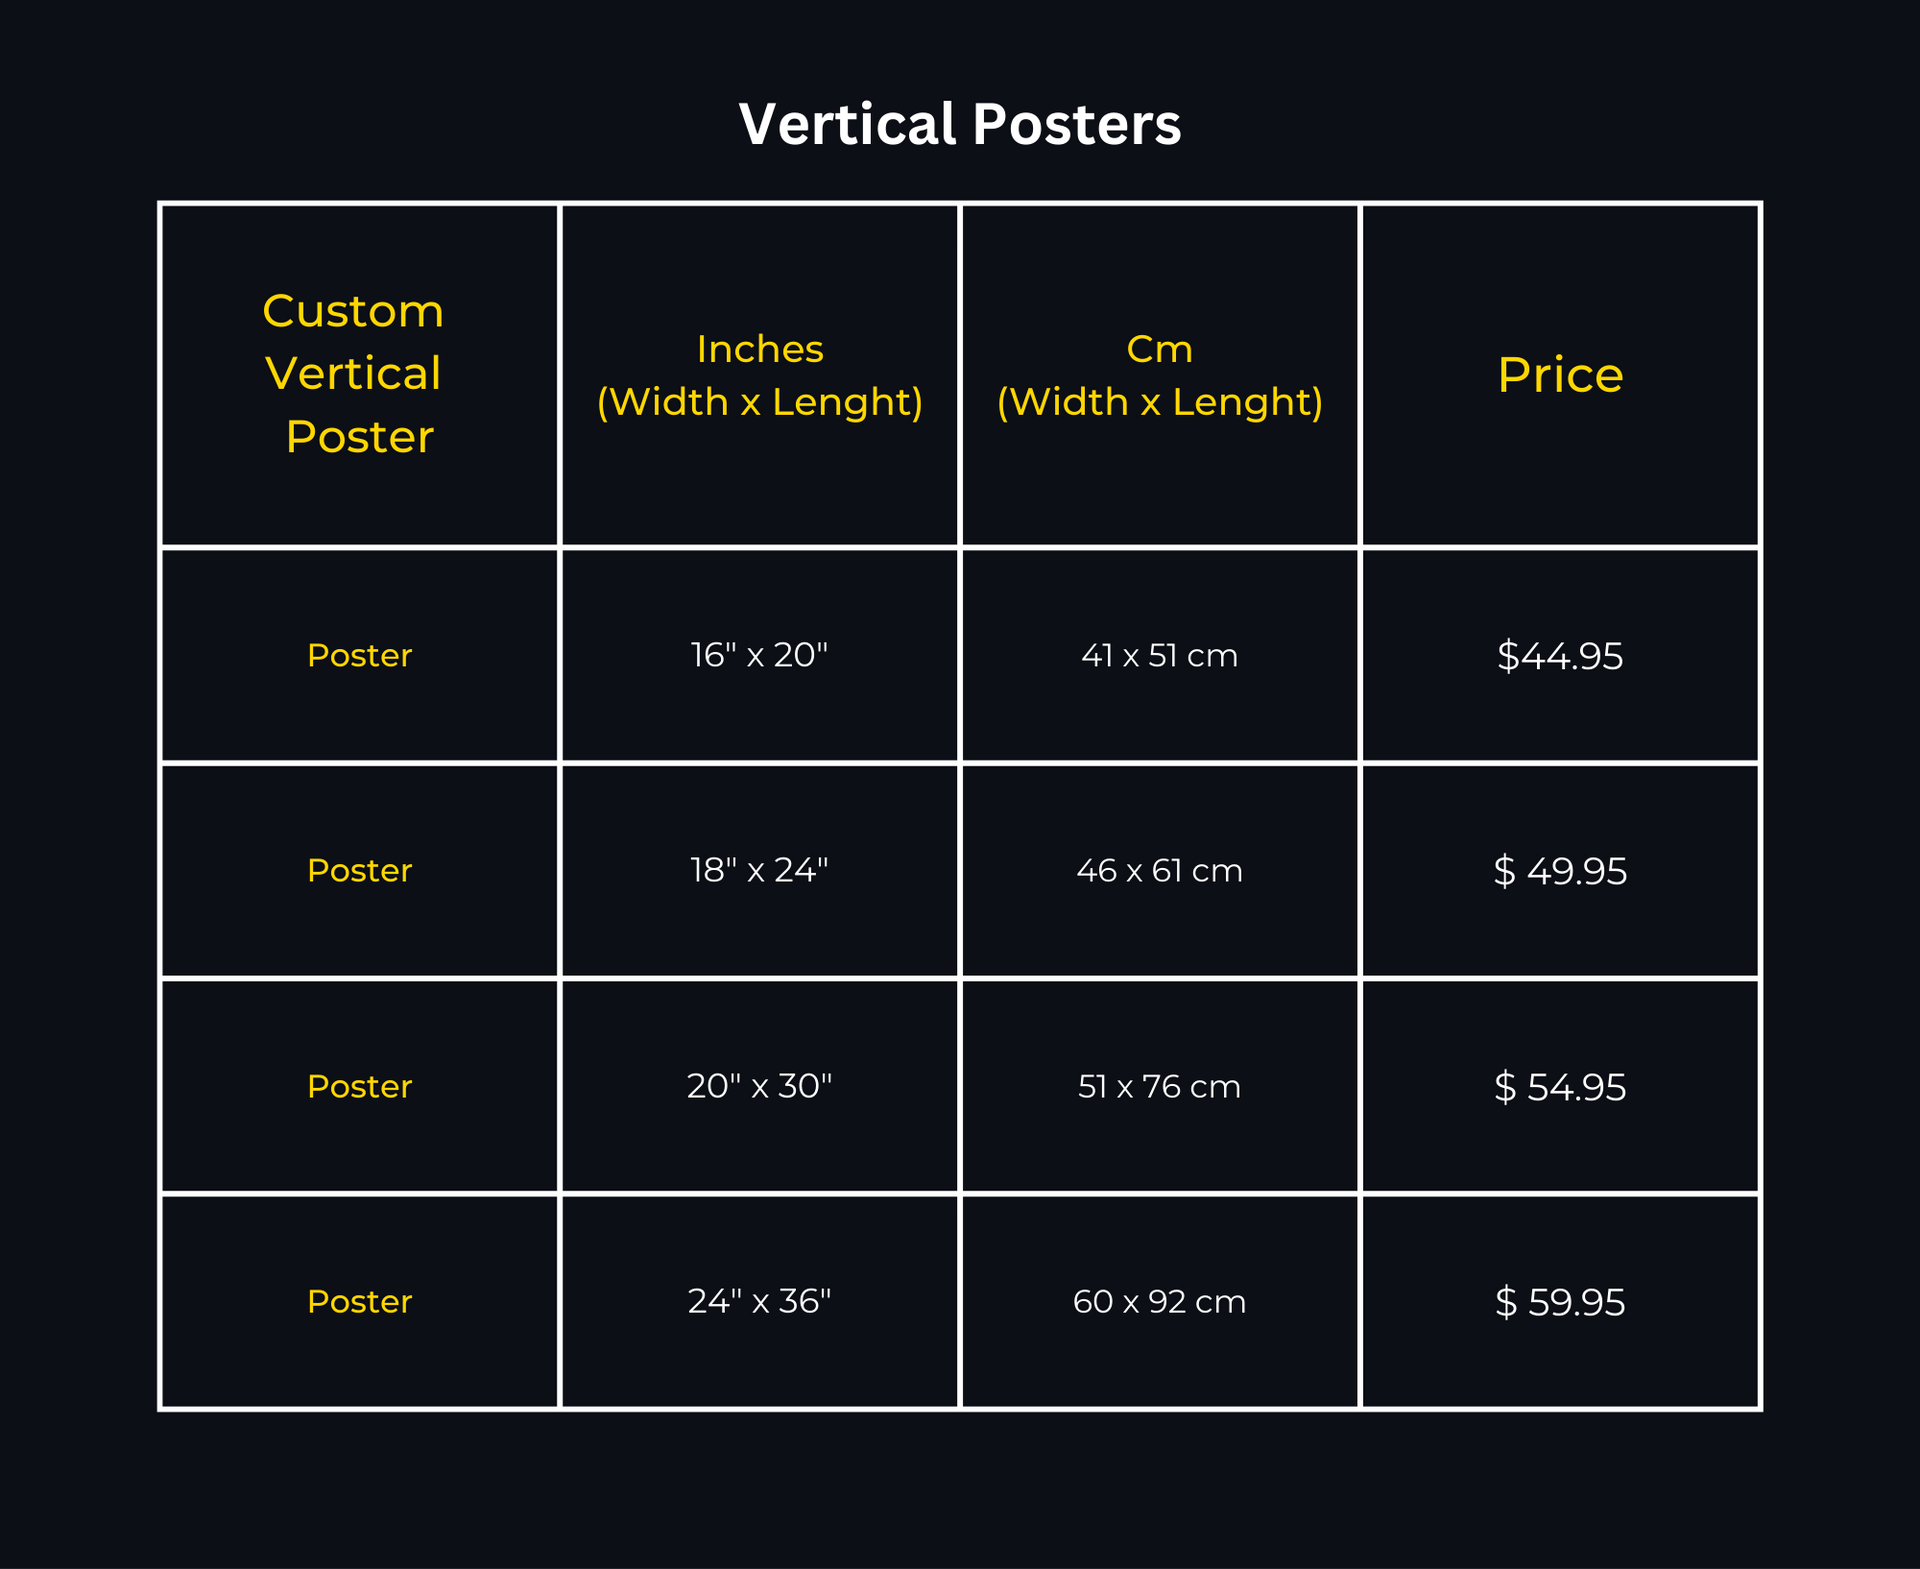 Vertical Custom Posters Table with price and sizes